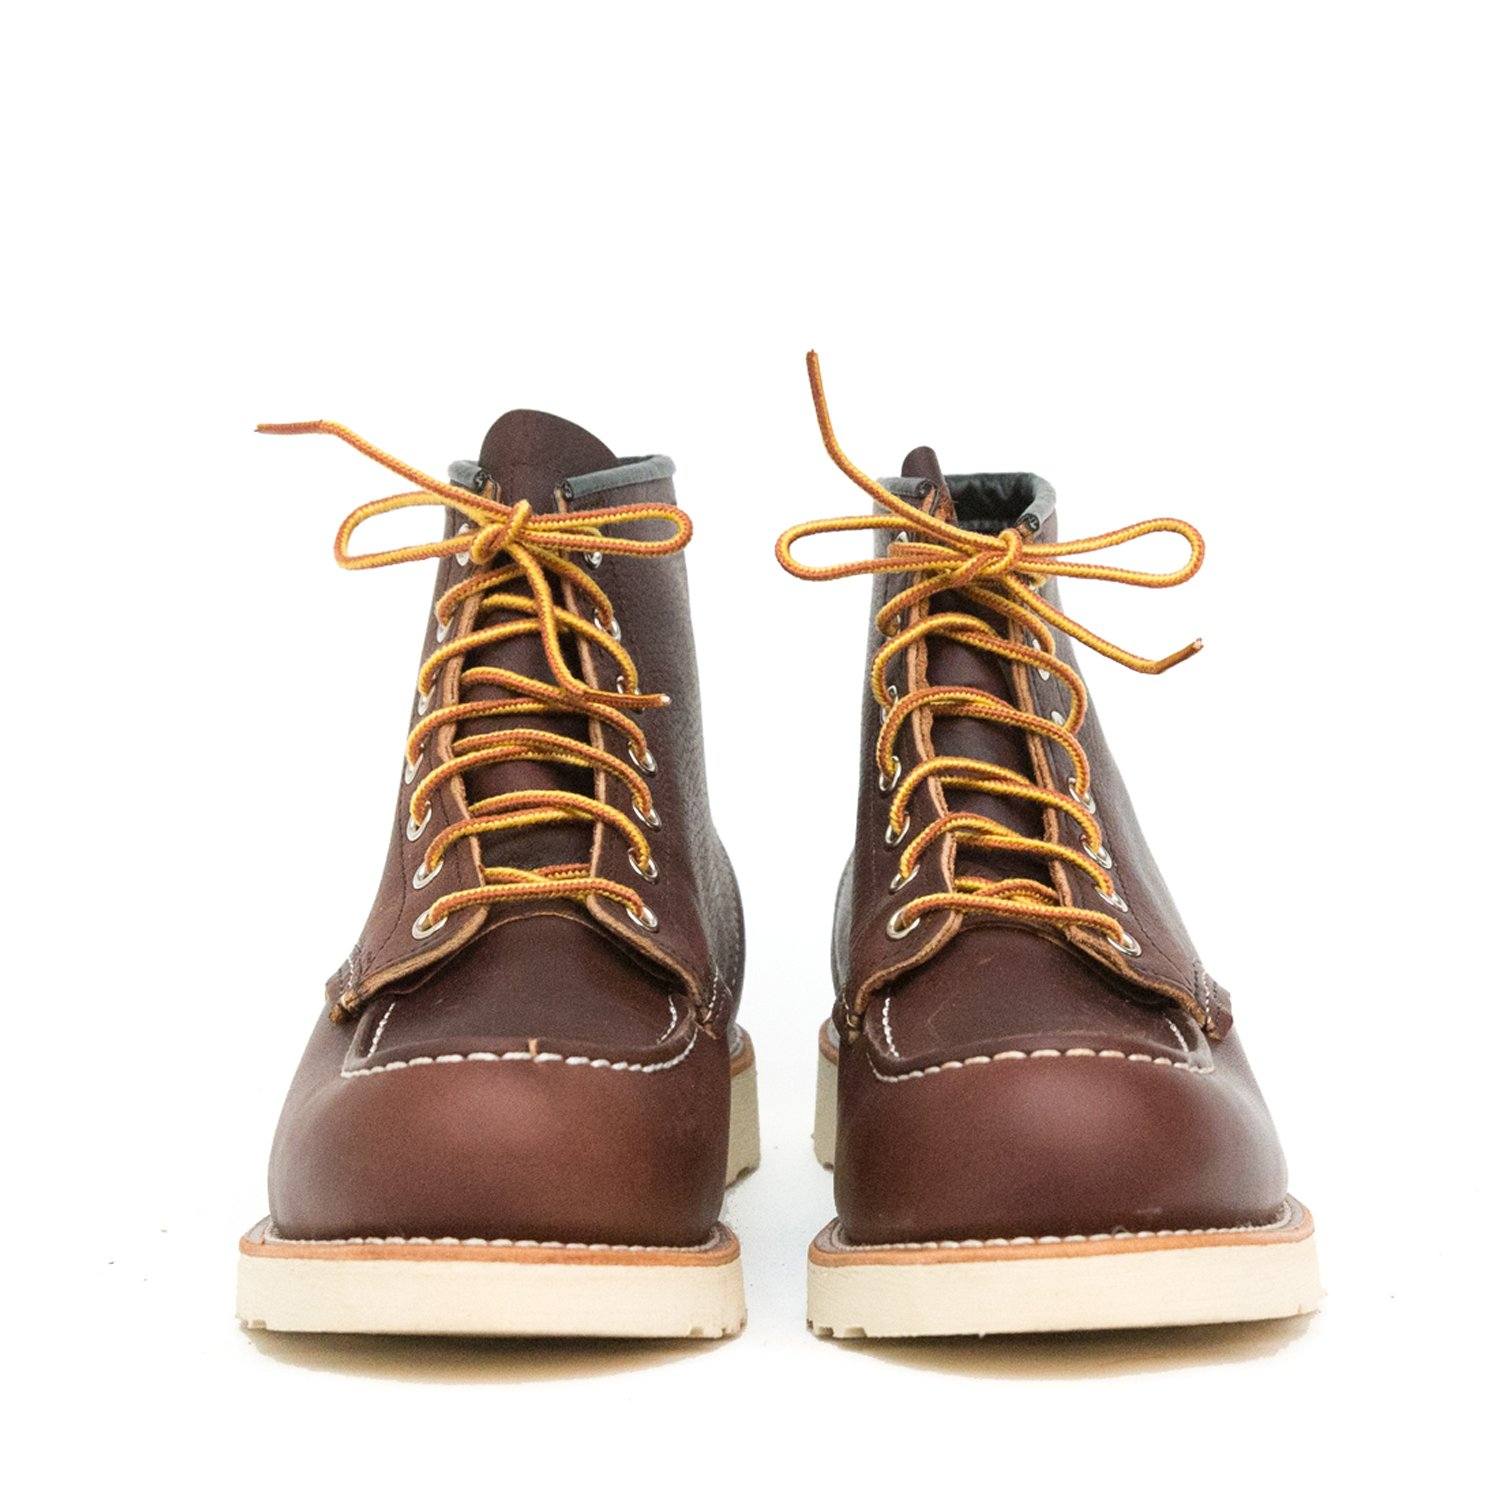 RED WING - Moc Toe 8138 - marrone Scarpe Uomo Red Wing Shoes 